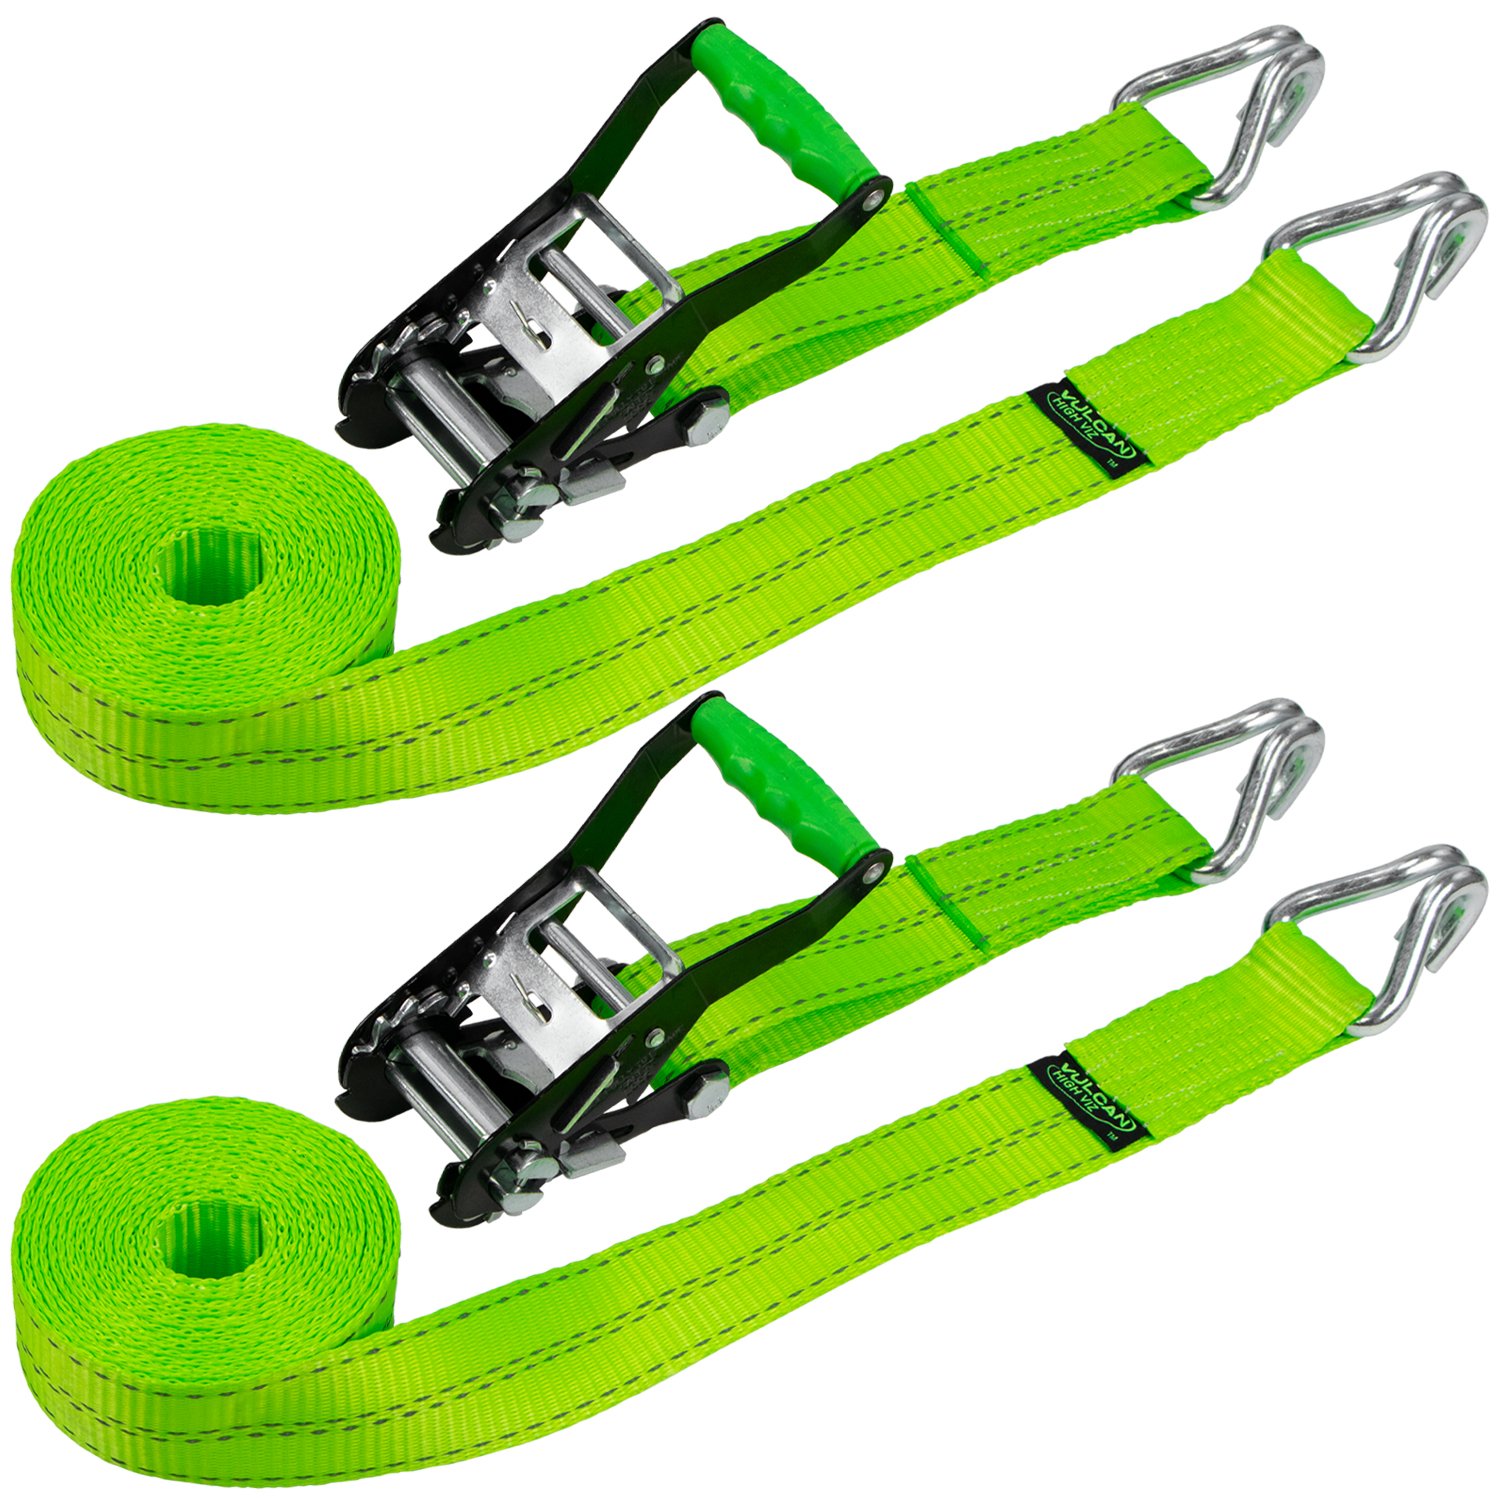 VULCAN Ratchet Strap with Wire Hooks - 2 Inch x 15 Foot - 2 Pack